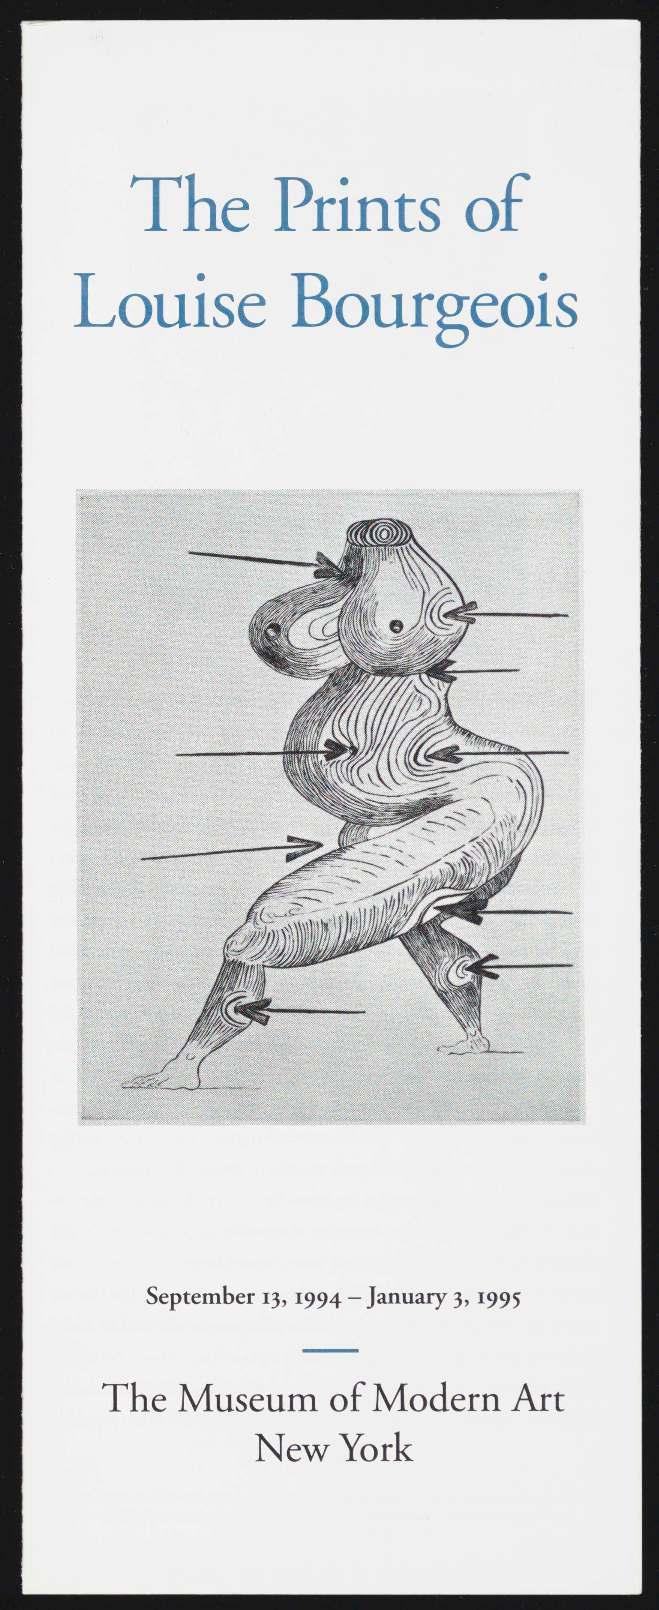 The Prints of Louise Bourgeois September 13, 1994